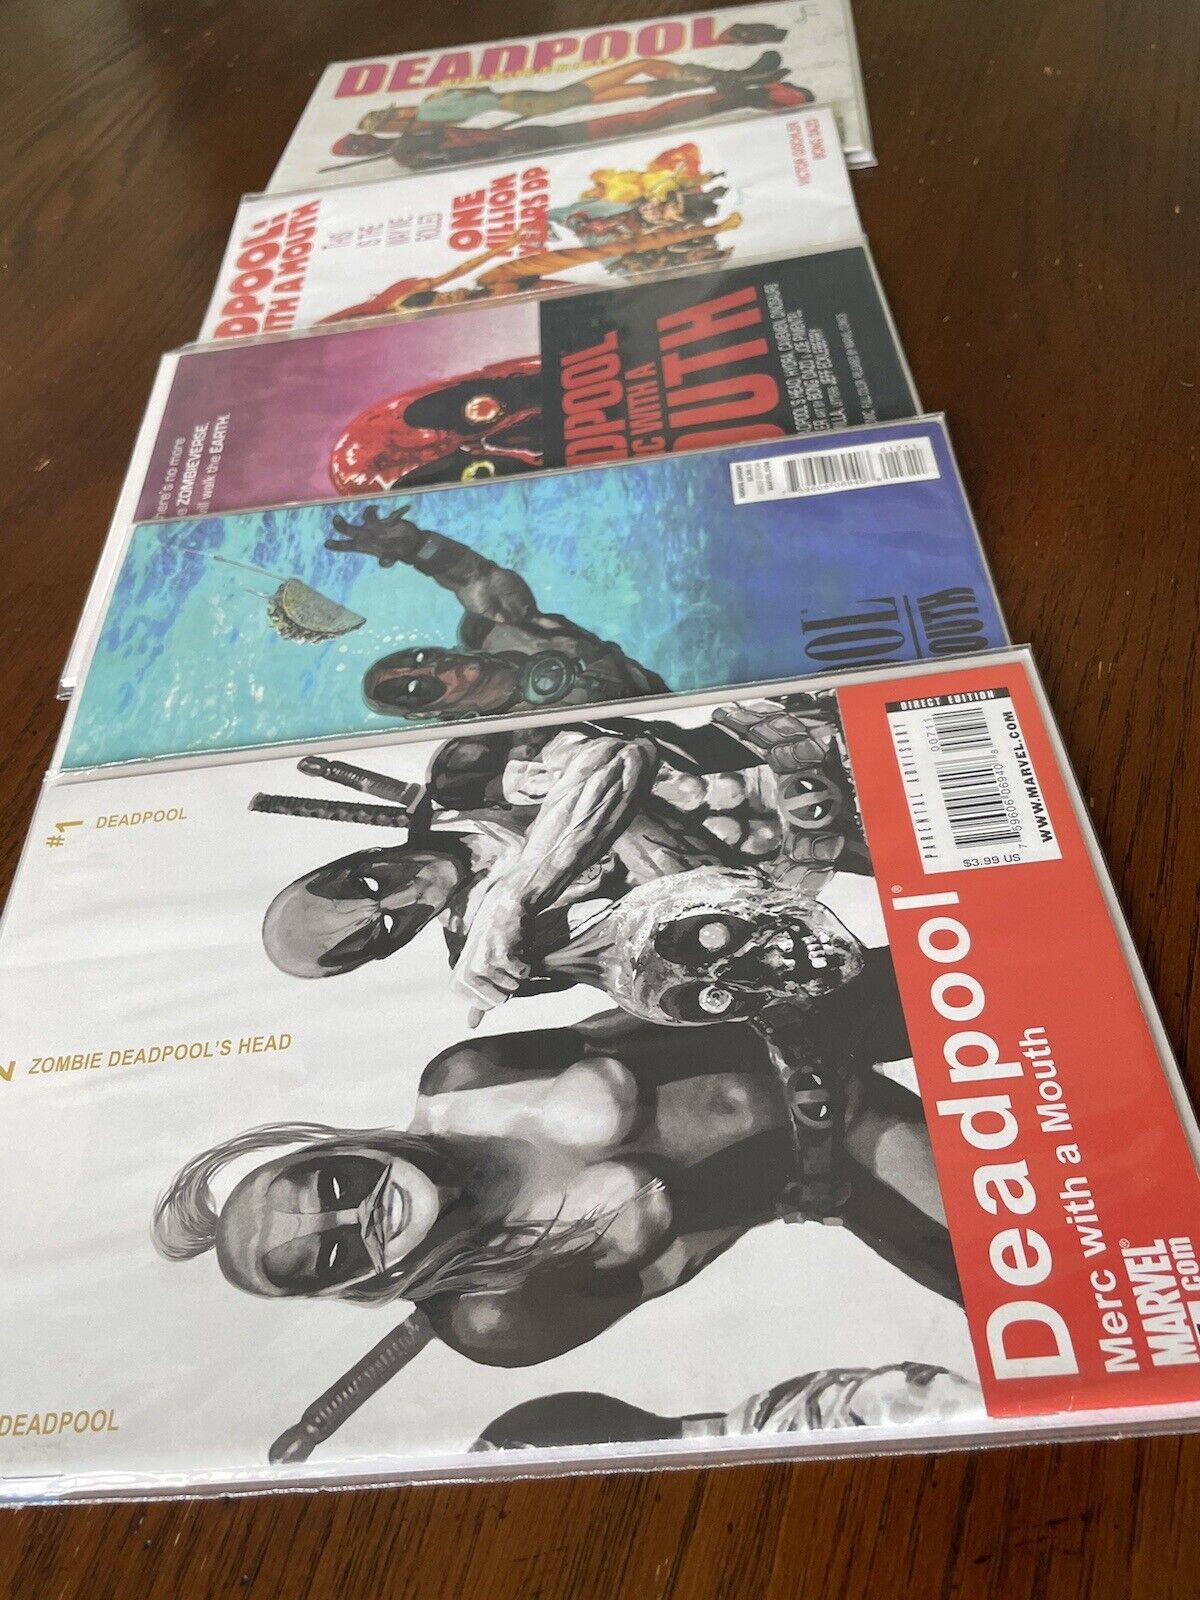 Deadpool Merc with a Mouth #7, 1st Print - First Lady Deadpool + 3, 5, 8, & 12